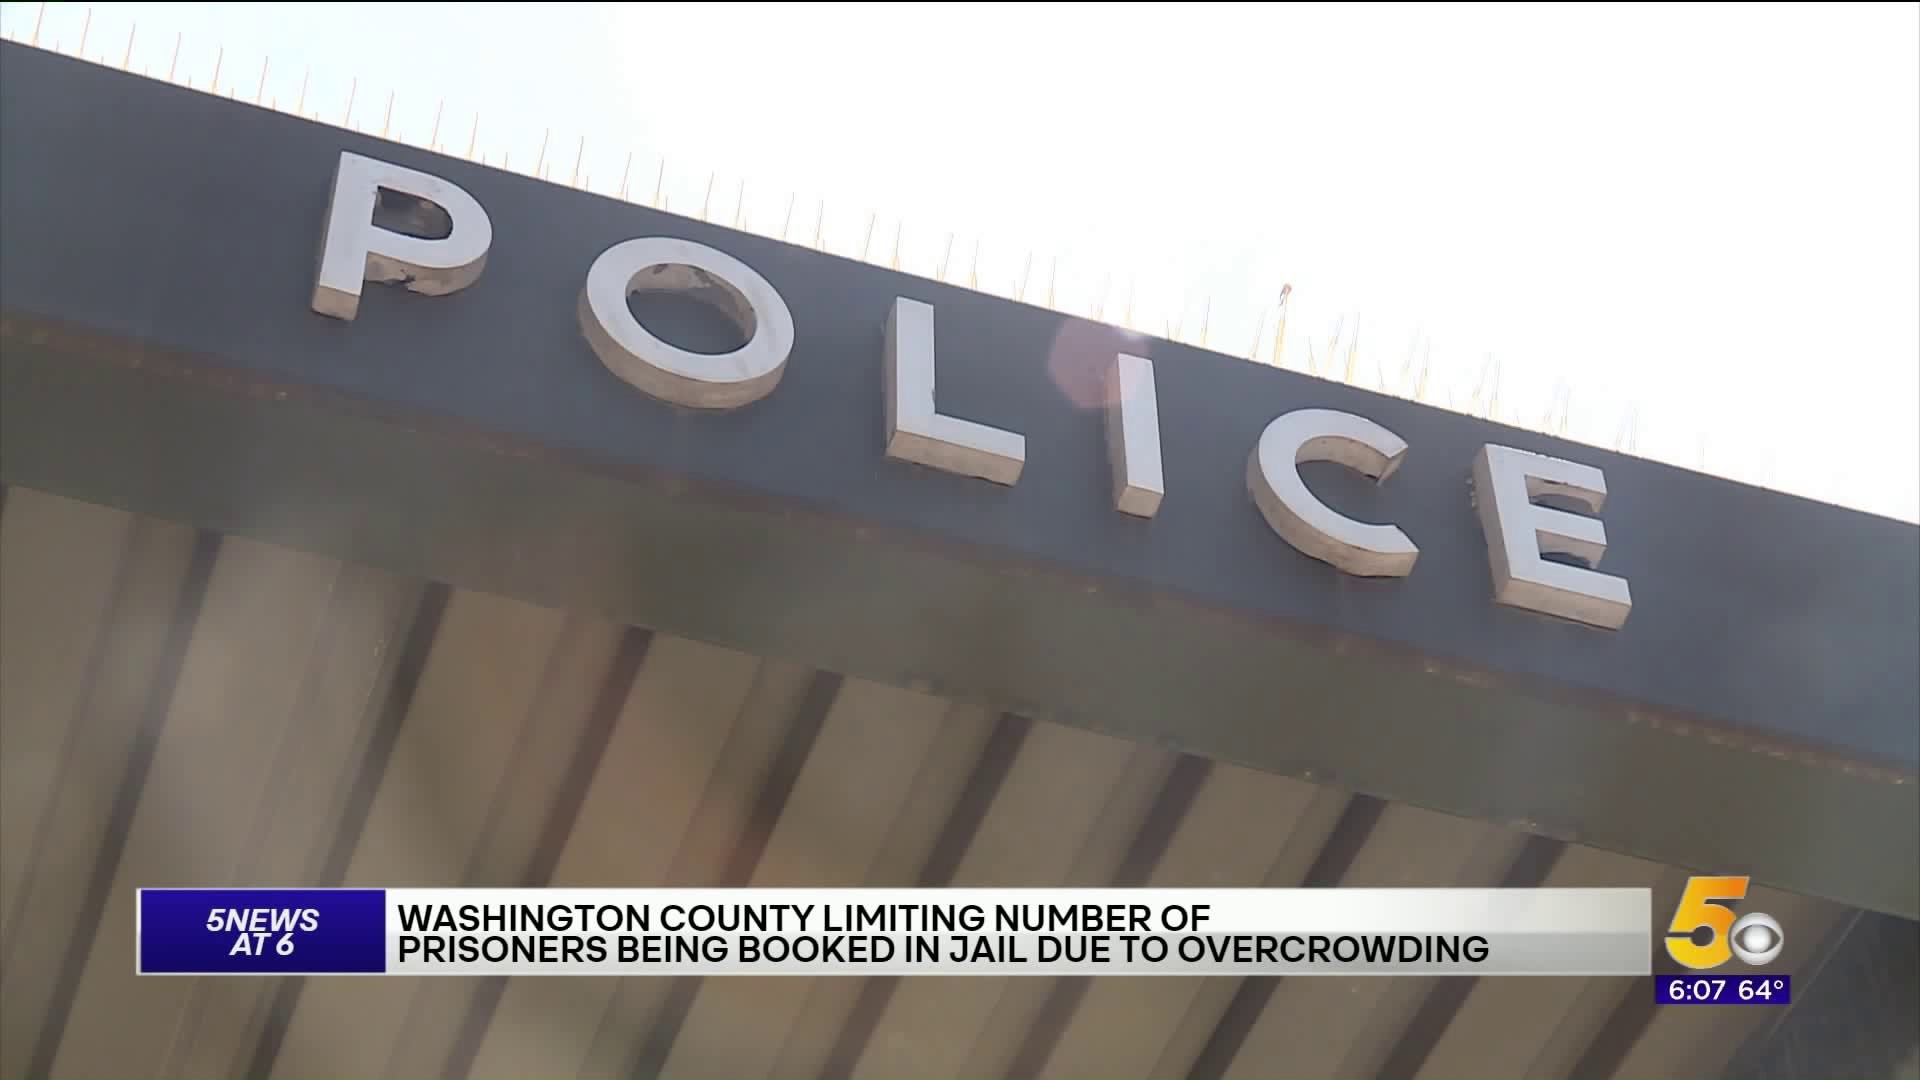 Washington County Jail Limiting Number of Prisoners Due to Overcrowding